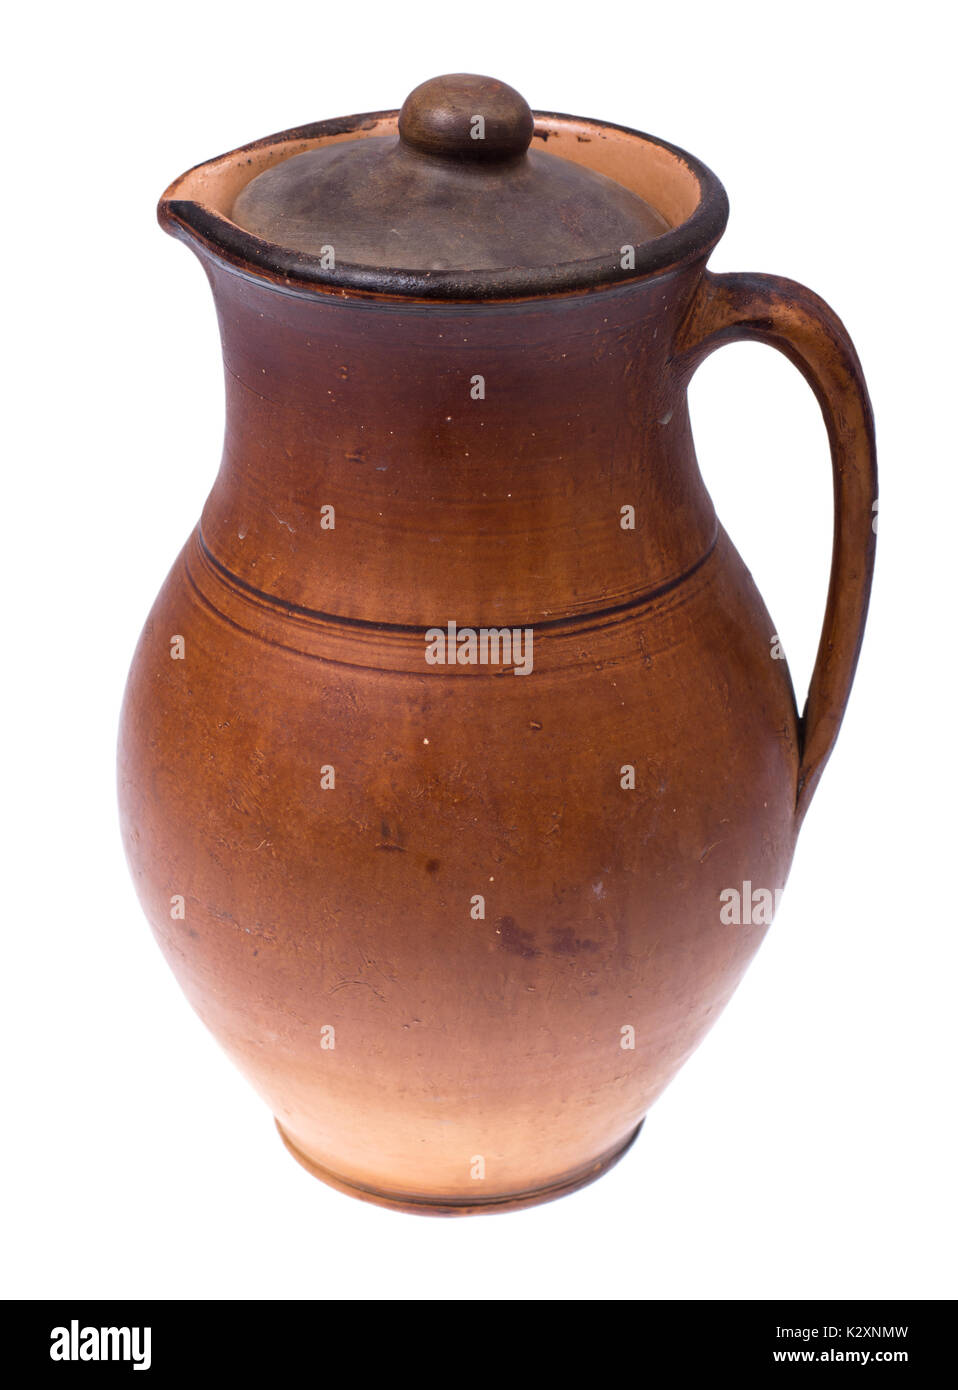 https://c8.alamy.com/comp/K2XNMW/clay-pitcher-with-lid-for-water-and-milk-isolated-on-white-background-K2XNMW.jpg